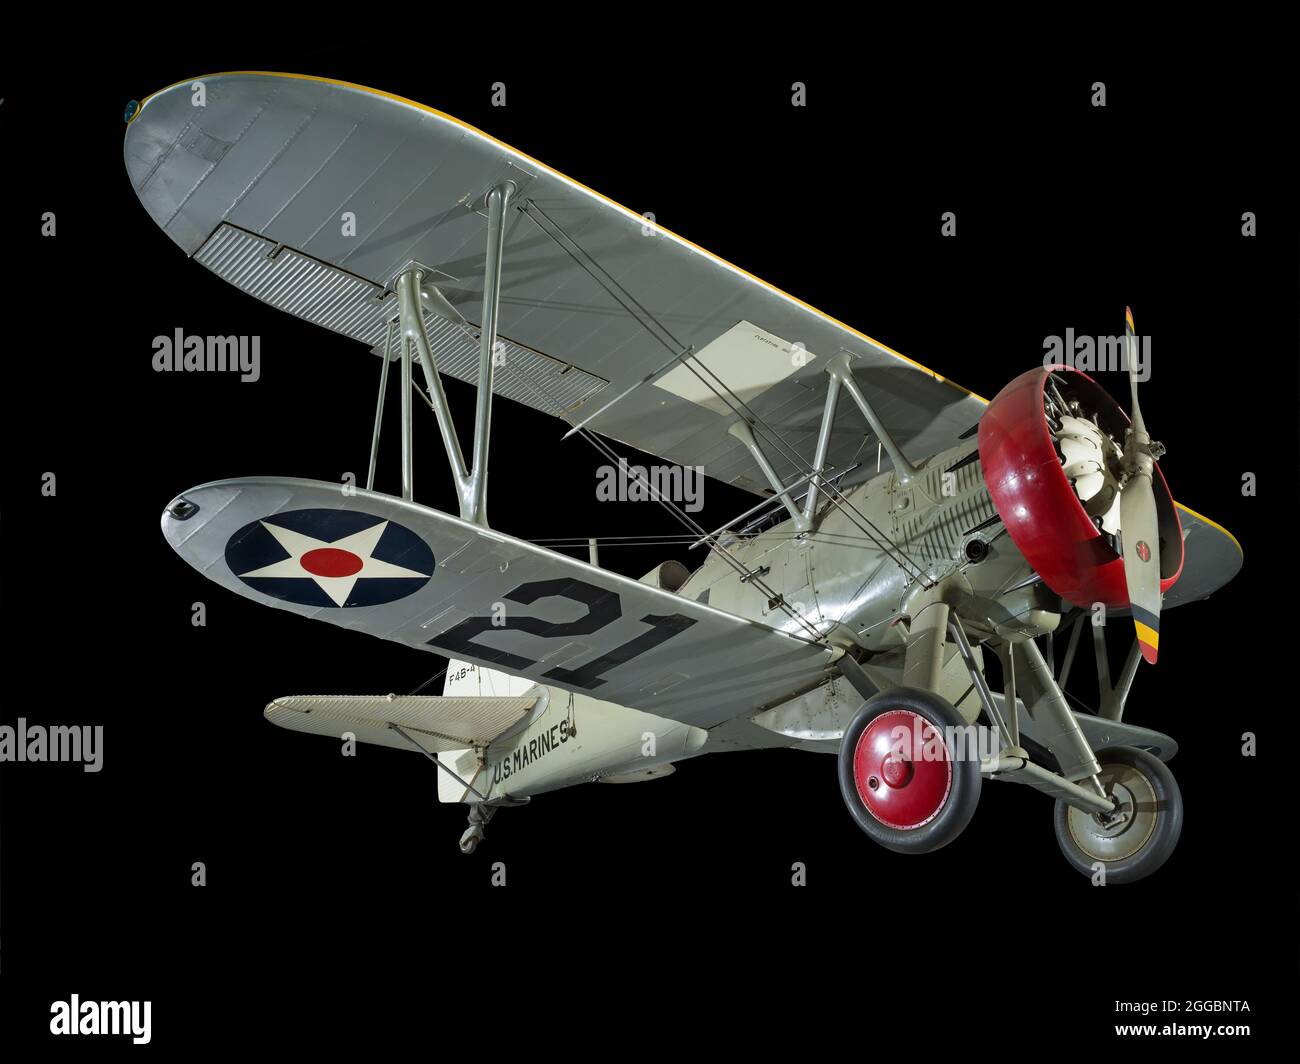 Wing Span 914 cm (360 in.), Length 612 cm (241 in.), Height 285 cm (112 in.), Weight 1,070 kg (2,354 lb). The Boeing F4B/P-12 series served as the primary fighter of the U.S. Navy and U.S. Army Air Corps in the early 1930s, and it remained in service in numerous roles until the early 1940s. It was the last wooden-winged, biplane fighter produced by Boeing and used by the U.S. military. The large quantity of F4B/P-12s built and purchased helped to establish Boeing as an important aircraft manufacturer and to sustain the firm through the economic hardships of the Great Depression. Total producti Stock Photo